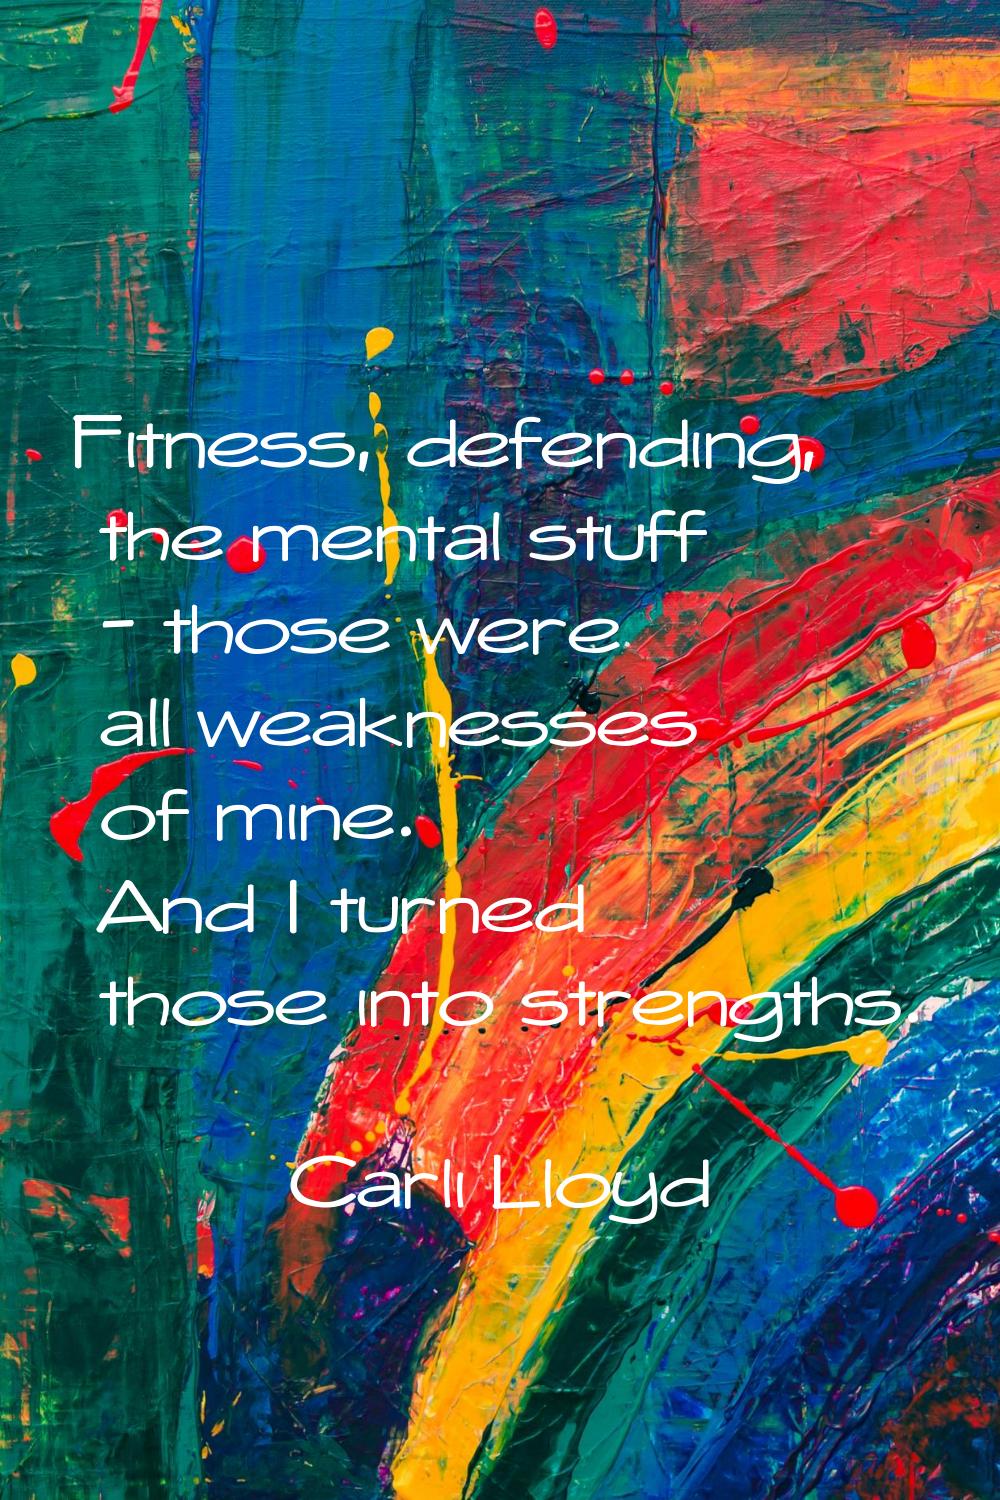 Fitness, defending, the mental stuff - those were all weaknesses of mine. And I turned those into s